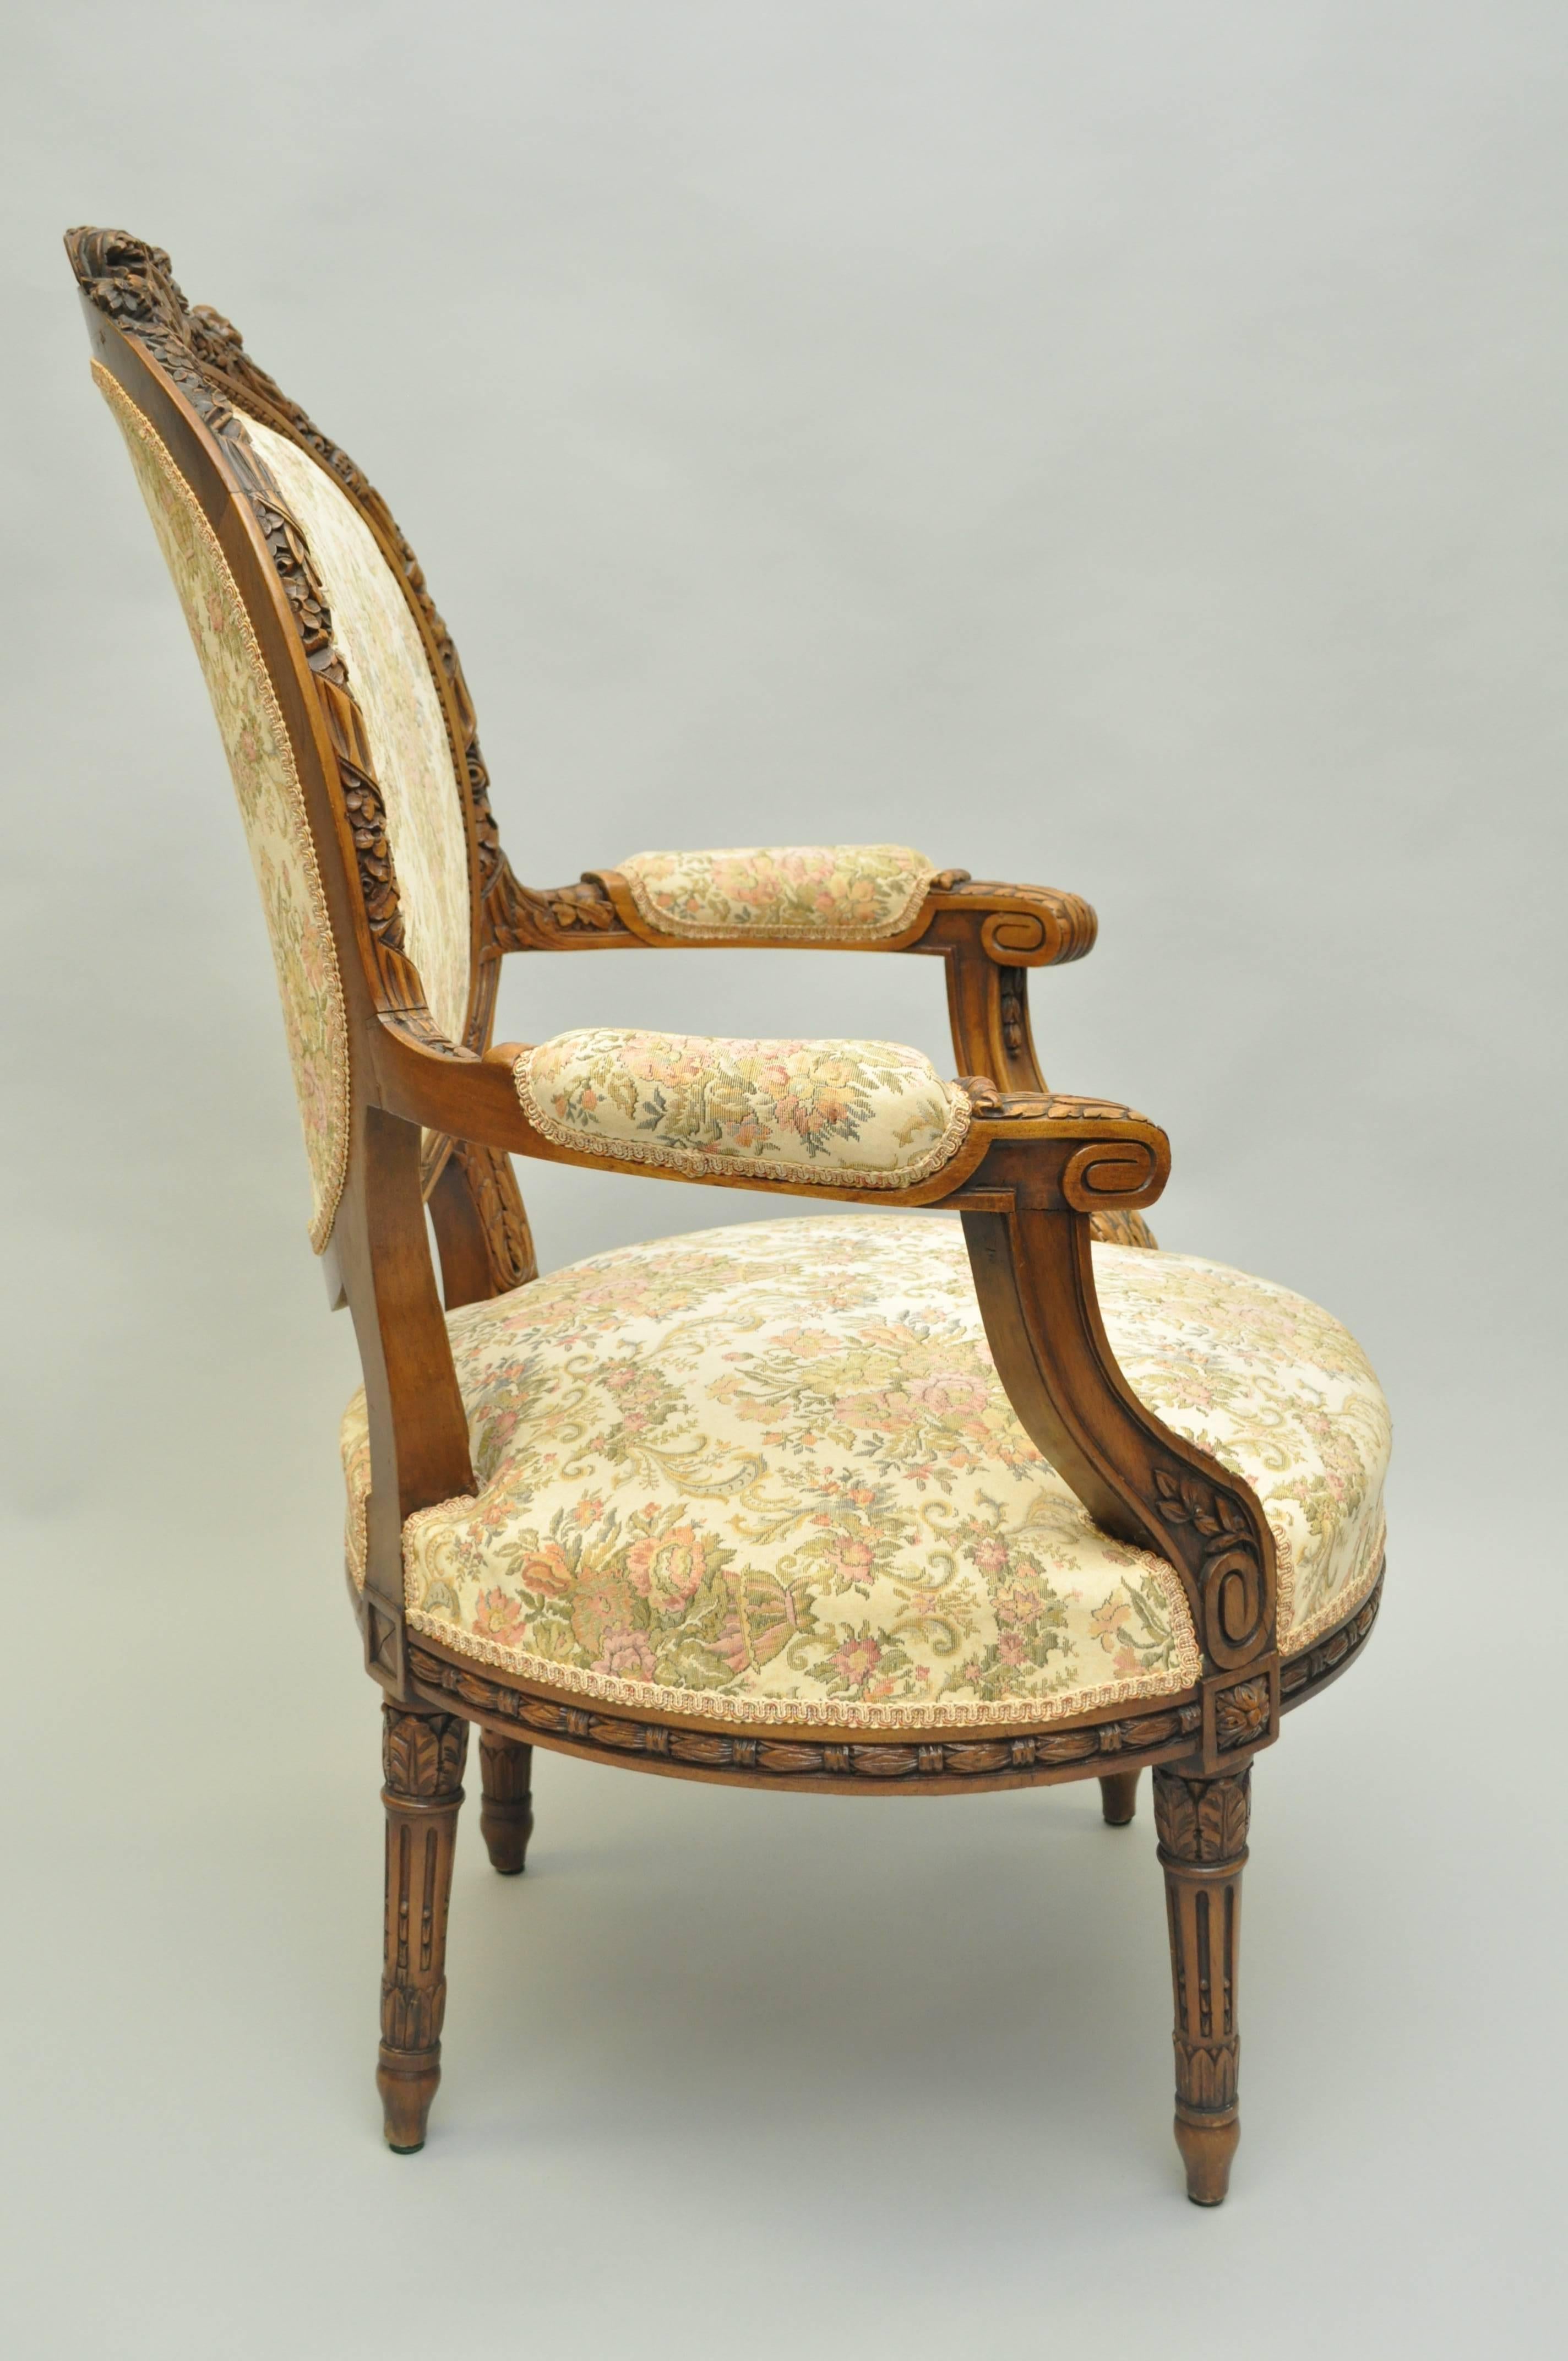 Finely Carved Musical Instrument Walnut French Victorian Louis XVI Arm Chair In Good Condition For Sale In Philadelphia, PA